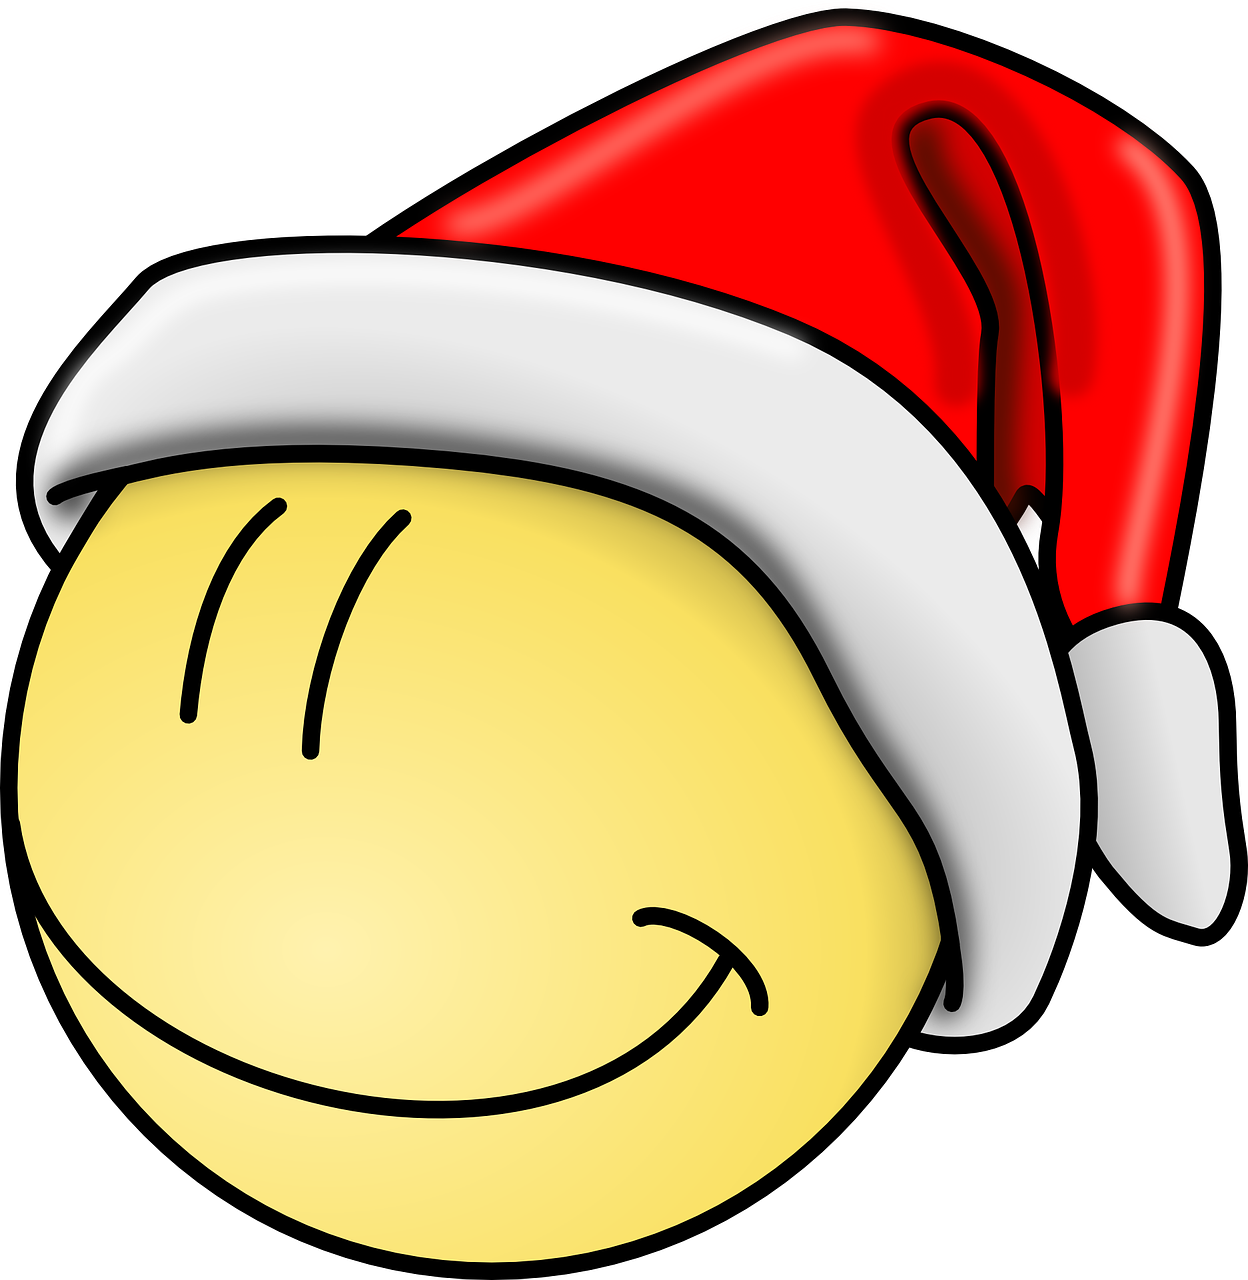 Download free photo of Santa,hat,red,face,smiley - from 